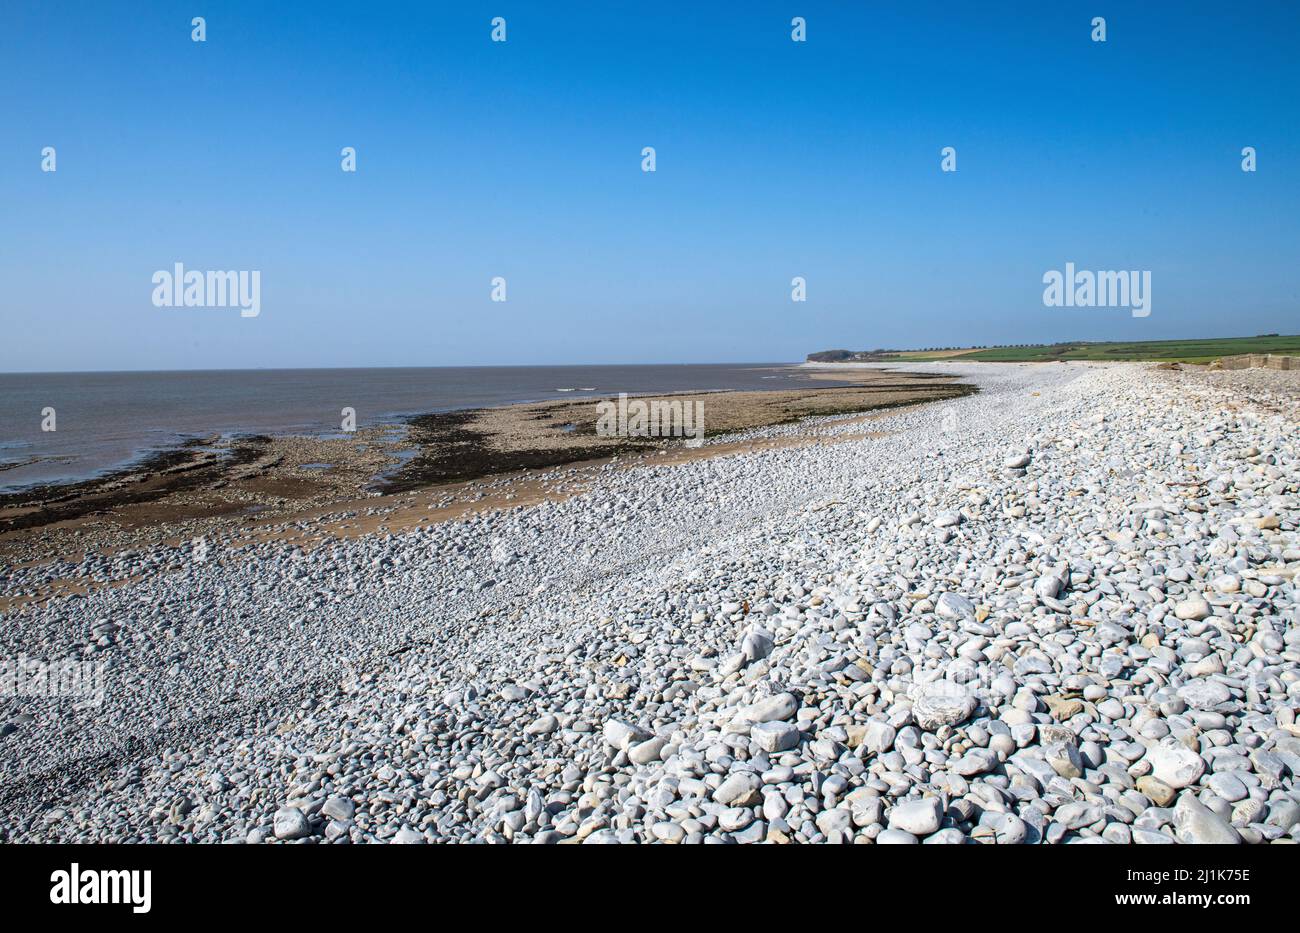 A view along the beach at Aberthaw (also known as Limpert Bay) looking west on a bright and sunny day in March Stock Photo